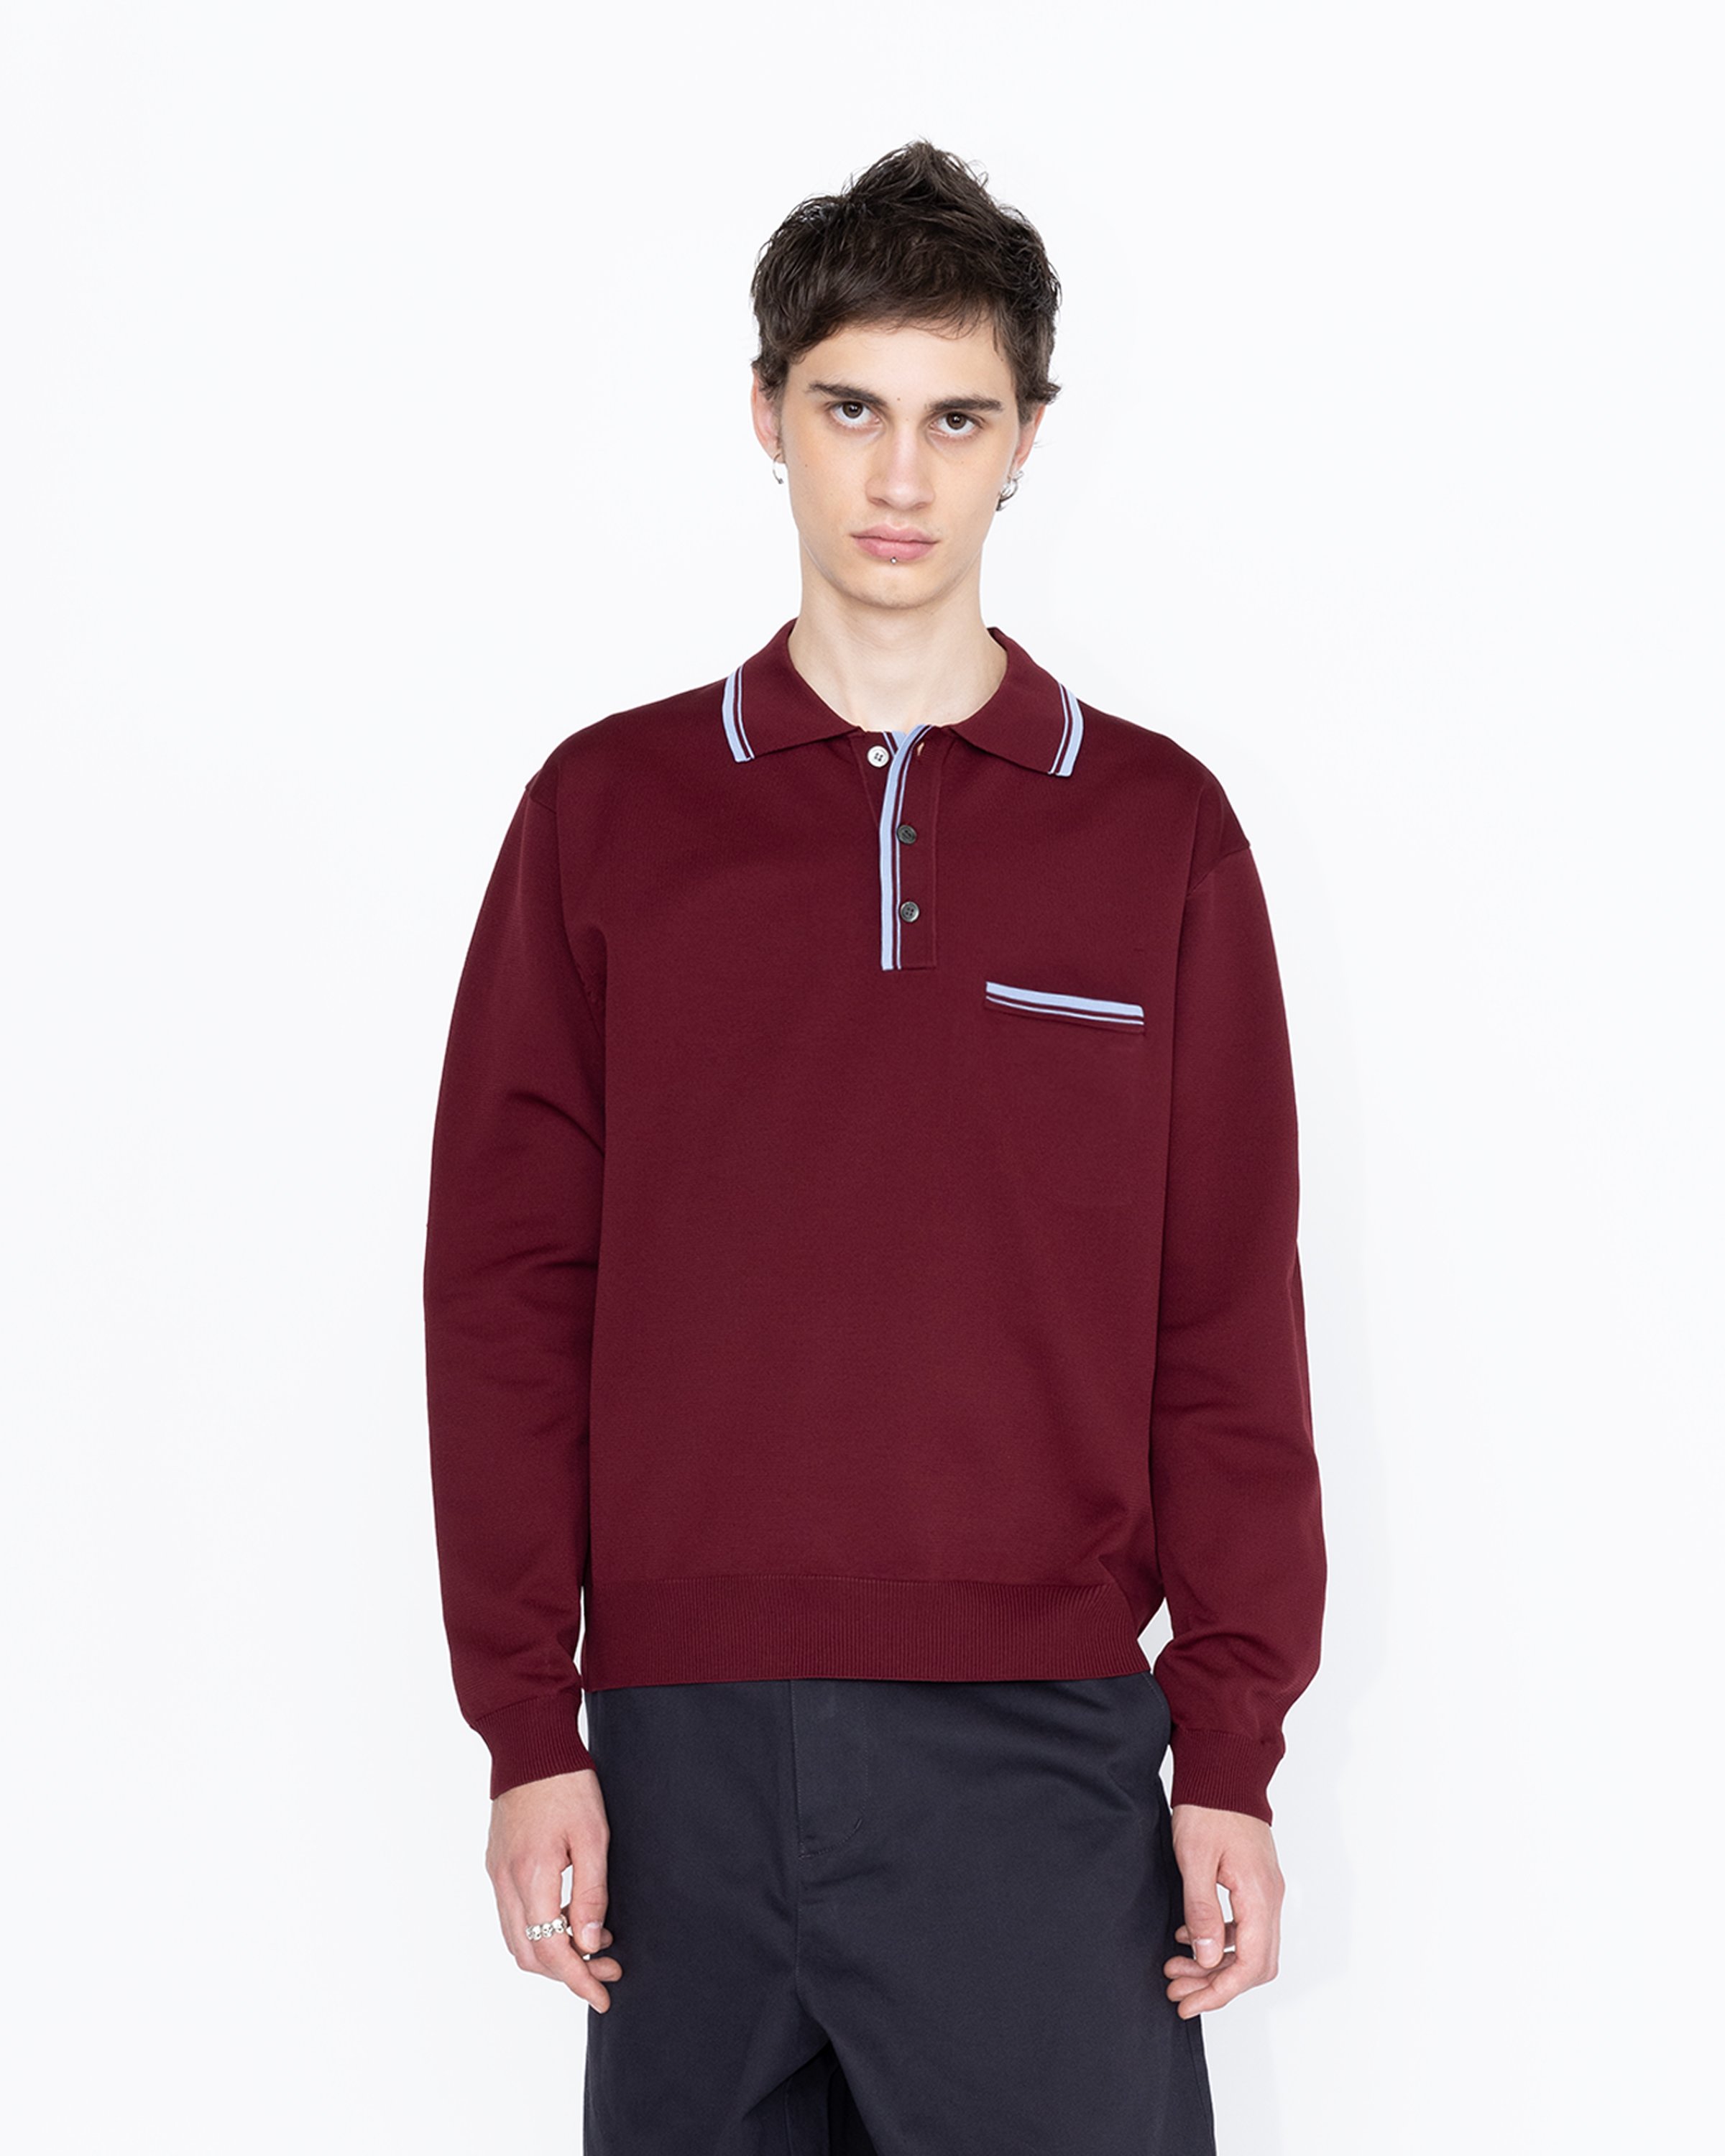 Highsnobiety HS05 - Long Sleeves Knit Polo Bordeaux - Clothing - Red - Image 3